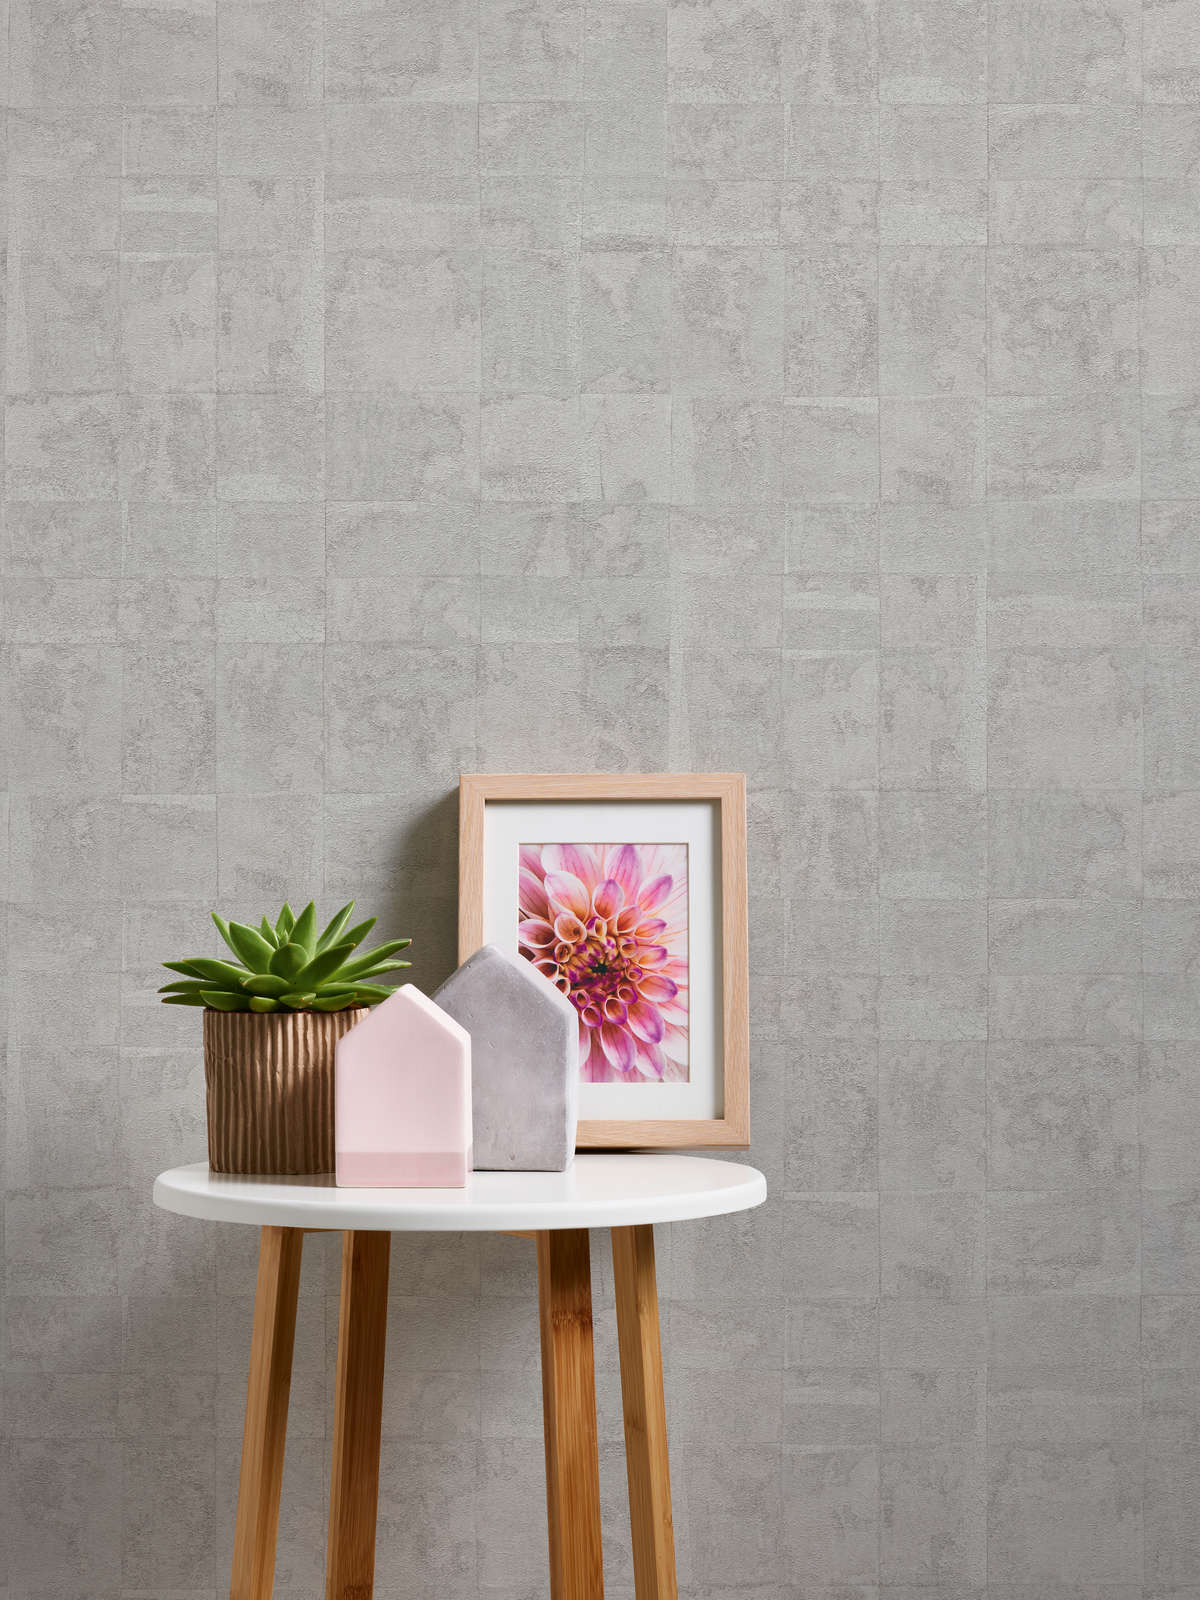             Textured wallpaper with a tiled look - light grey, silver
        